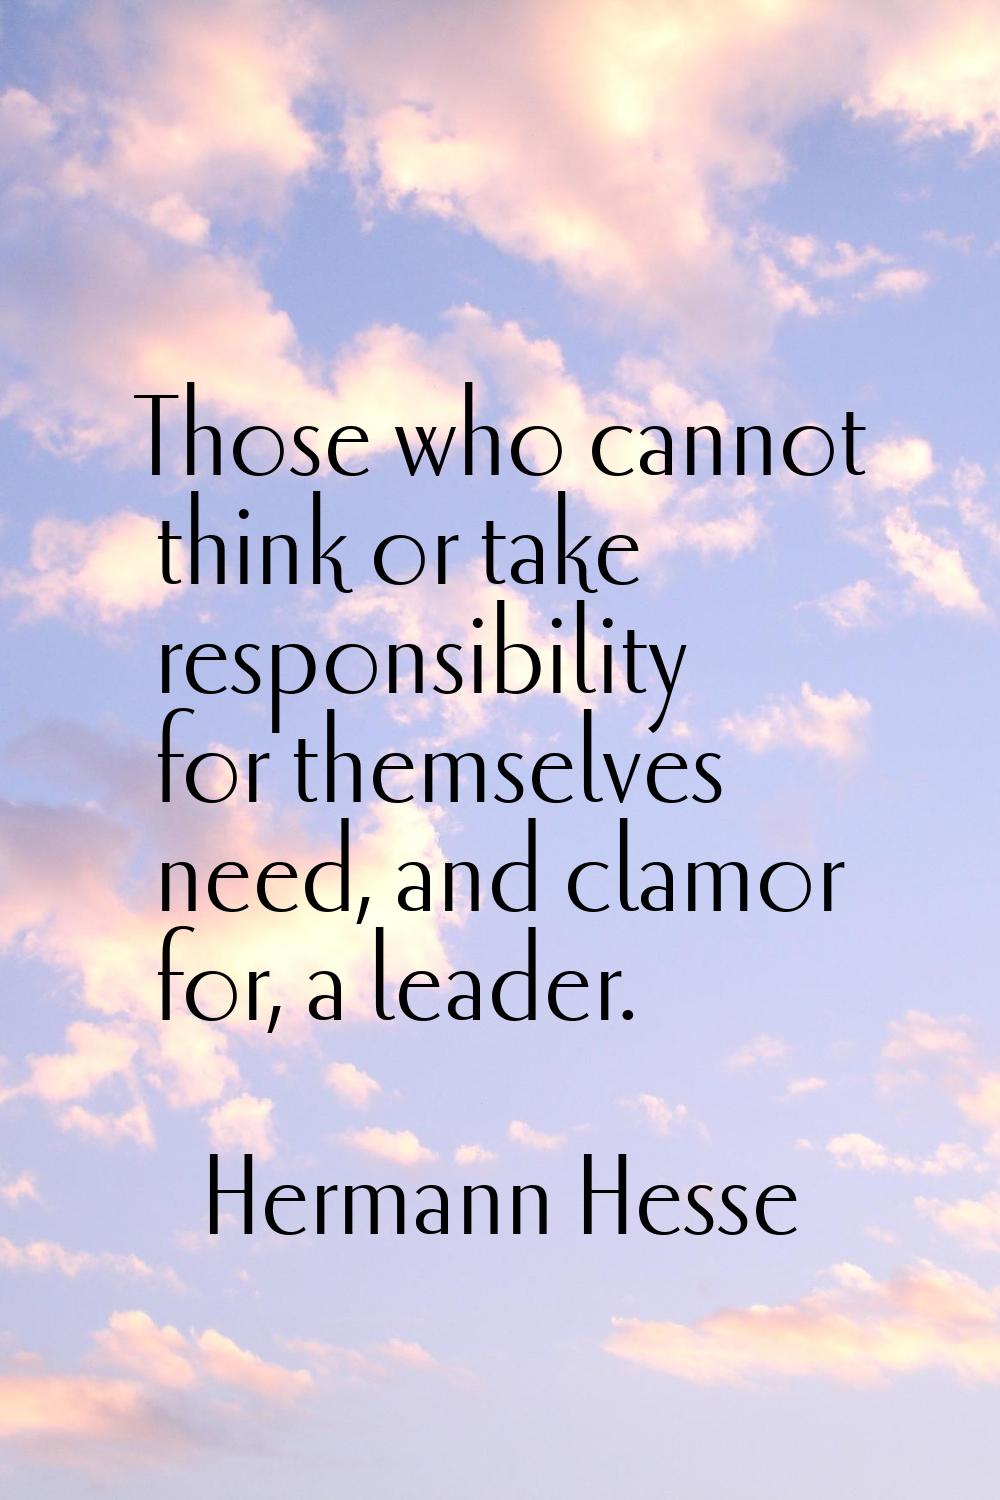 Those who cannot think or take responsibility for themselves need, and clamor for, a leader.